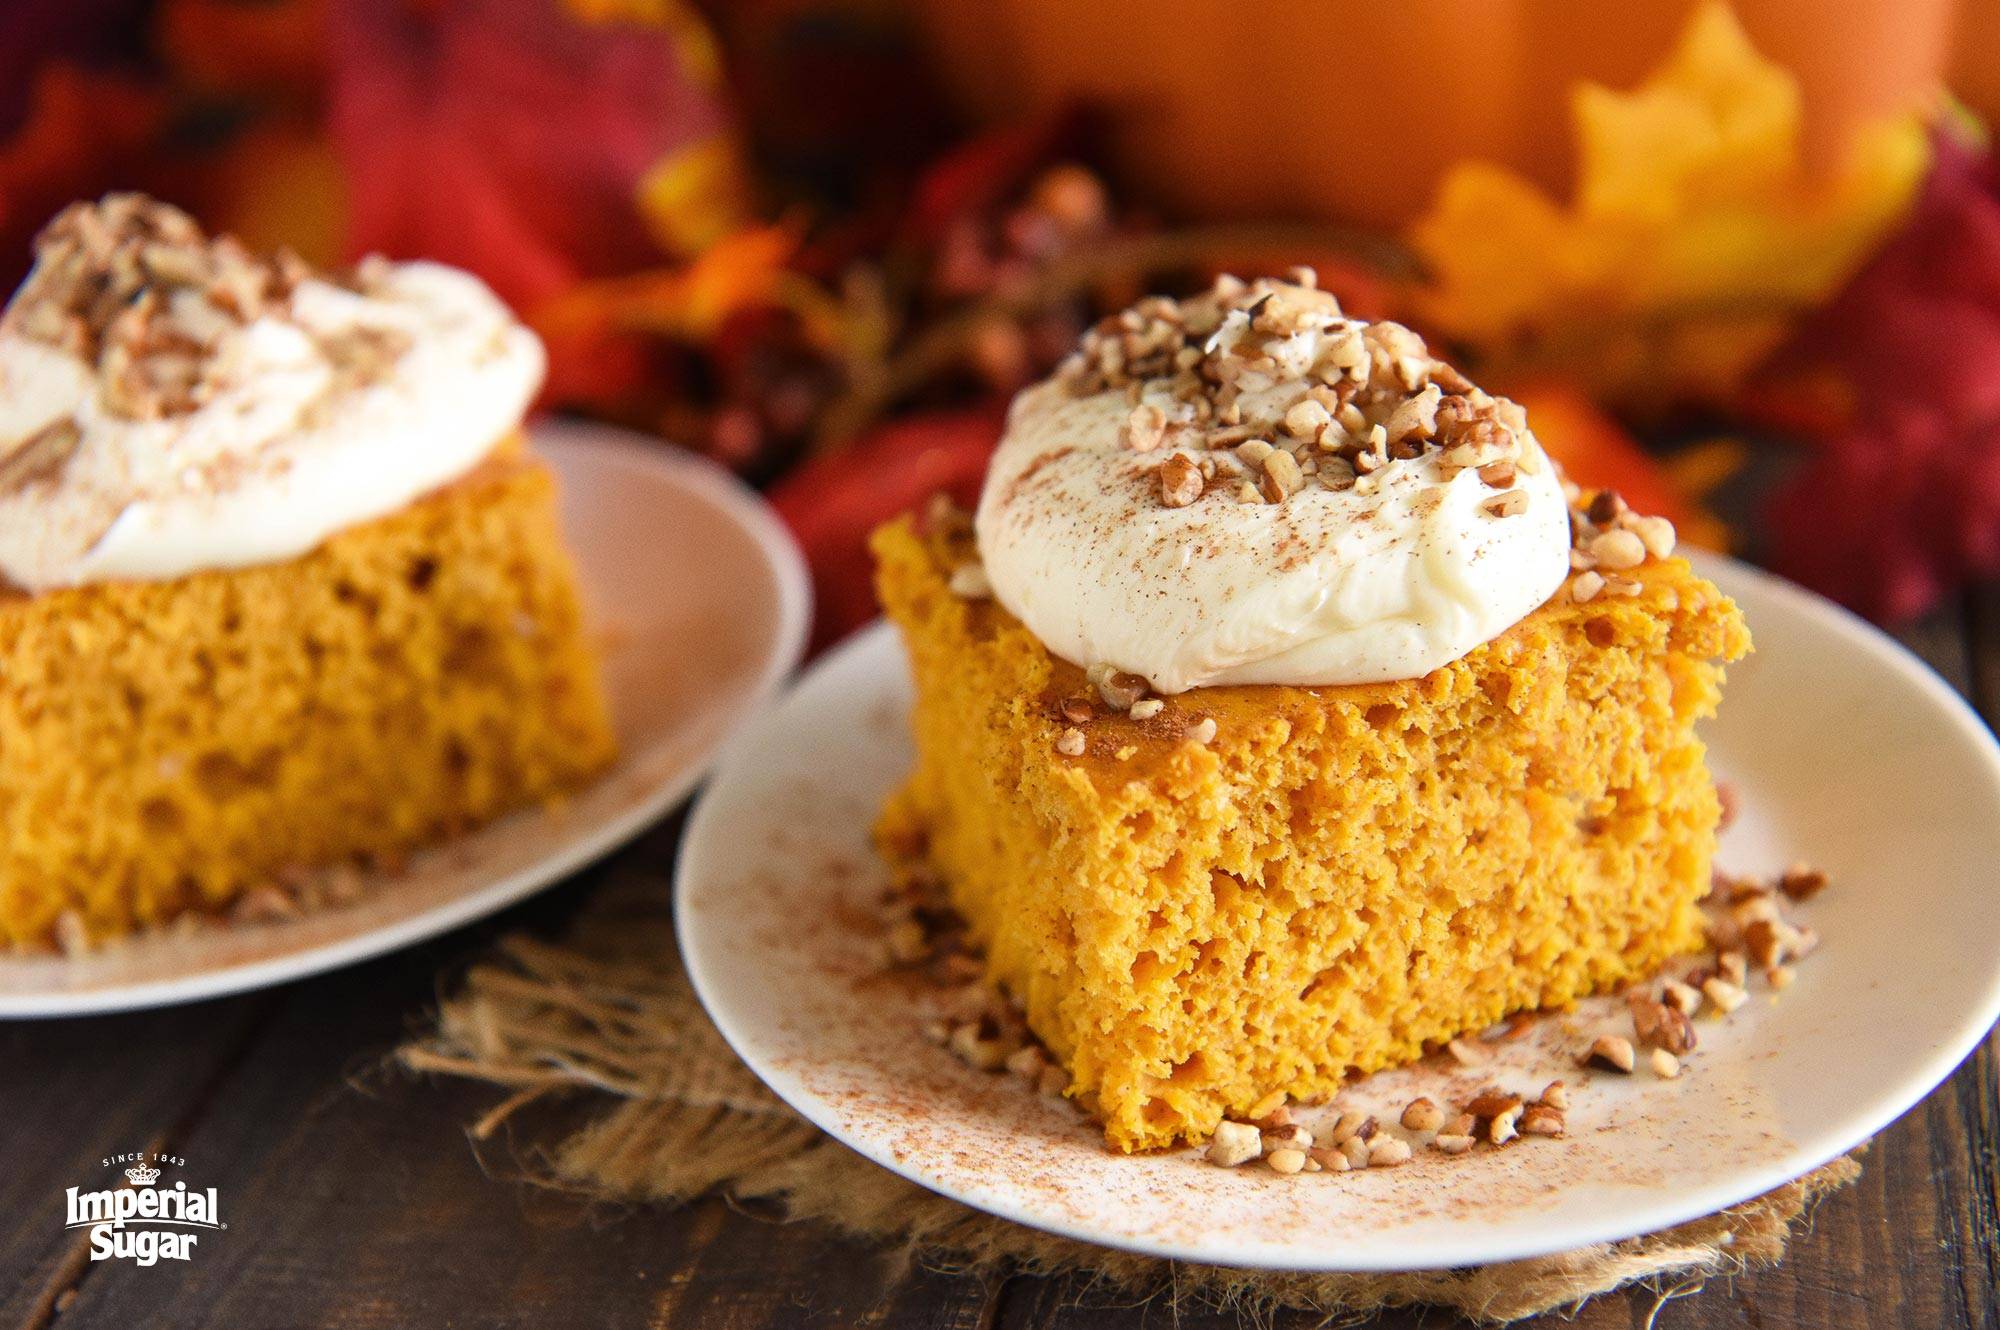 Pumpkin Coffee Cake with Crumb Topping - Sally's Baking Addiction